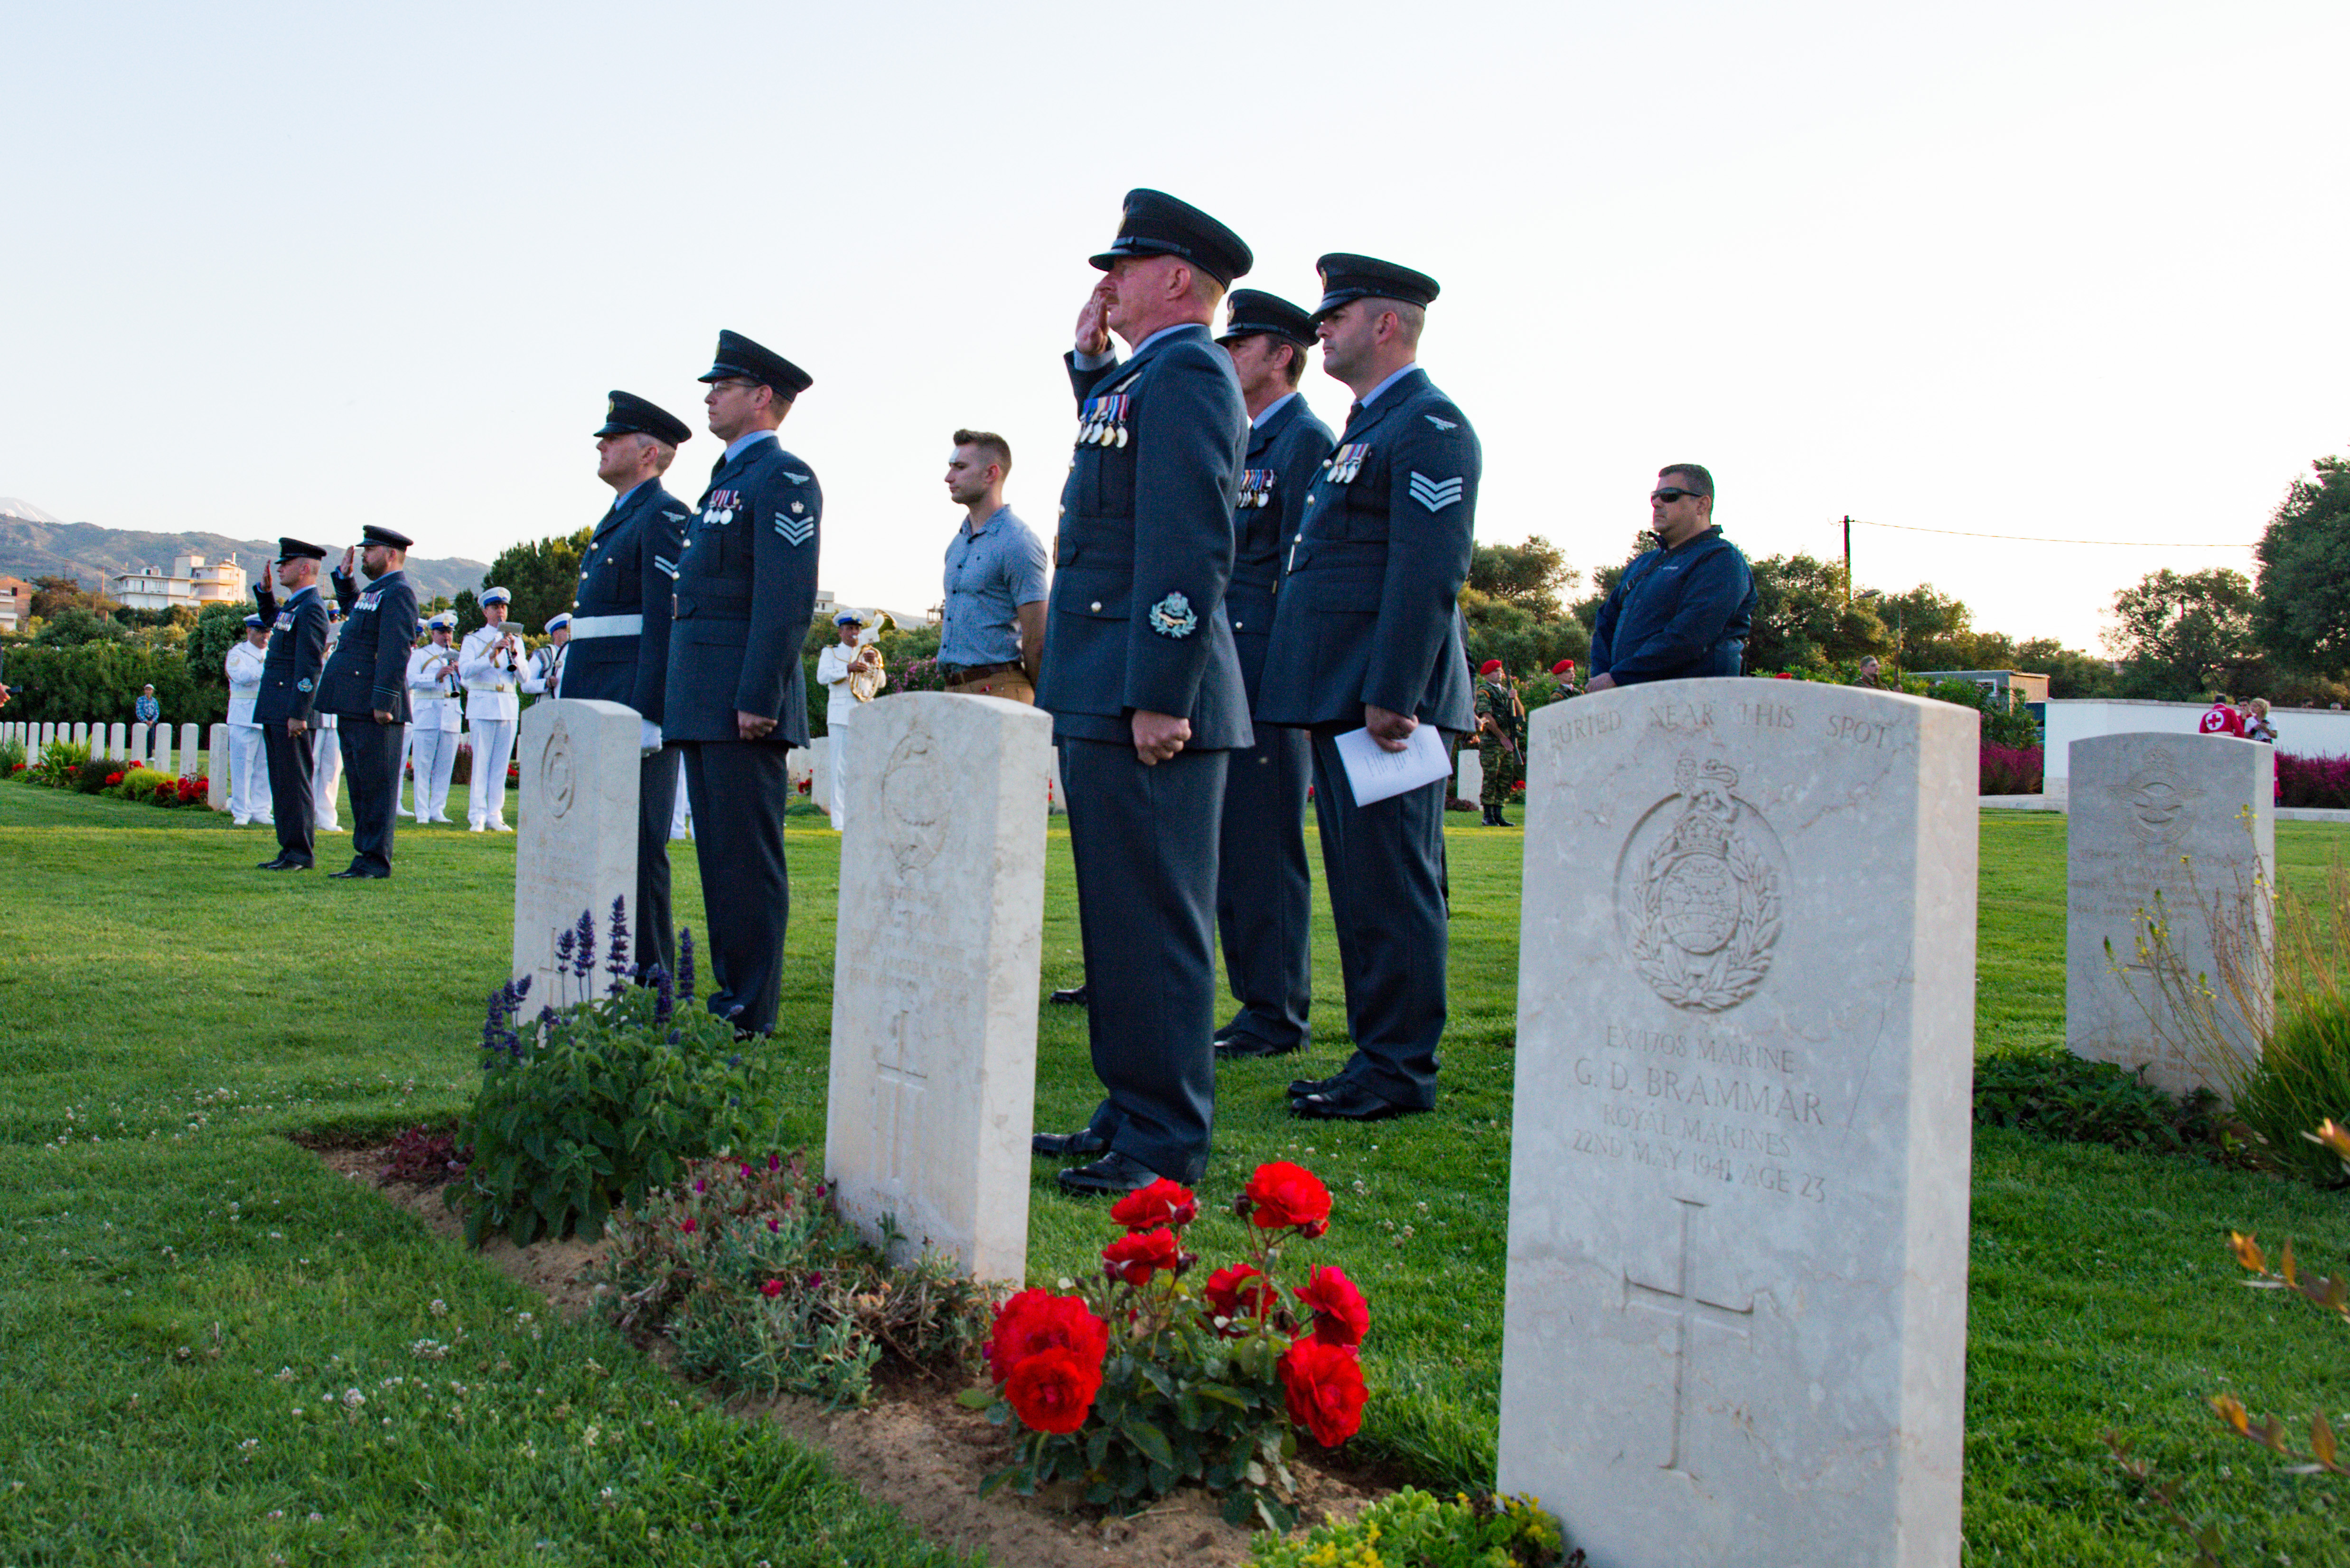 Personnel salute by memorial graves.